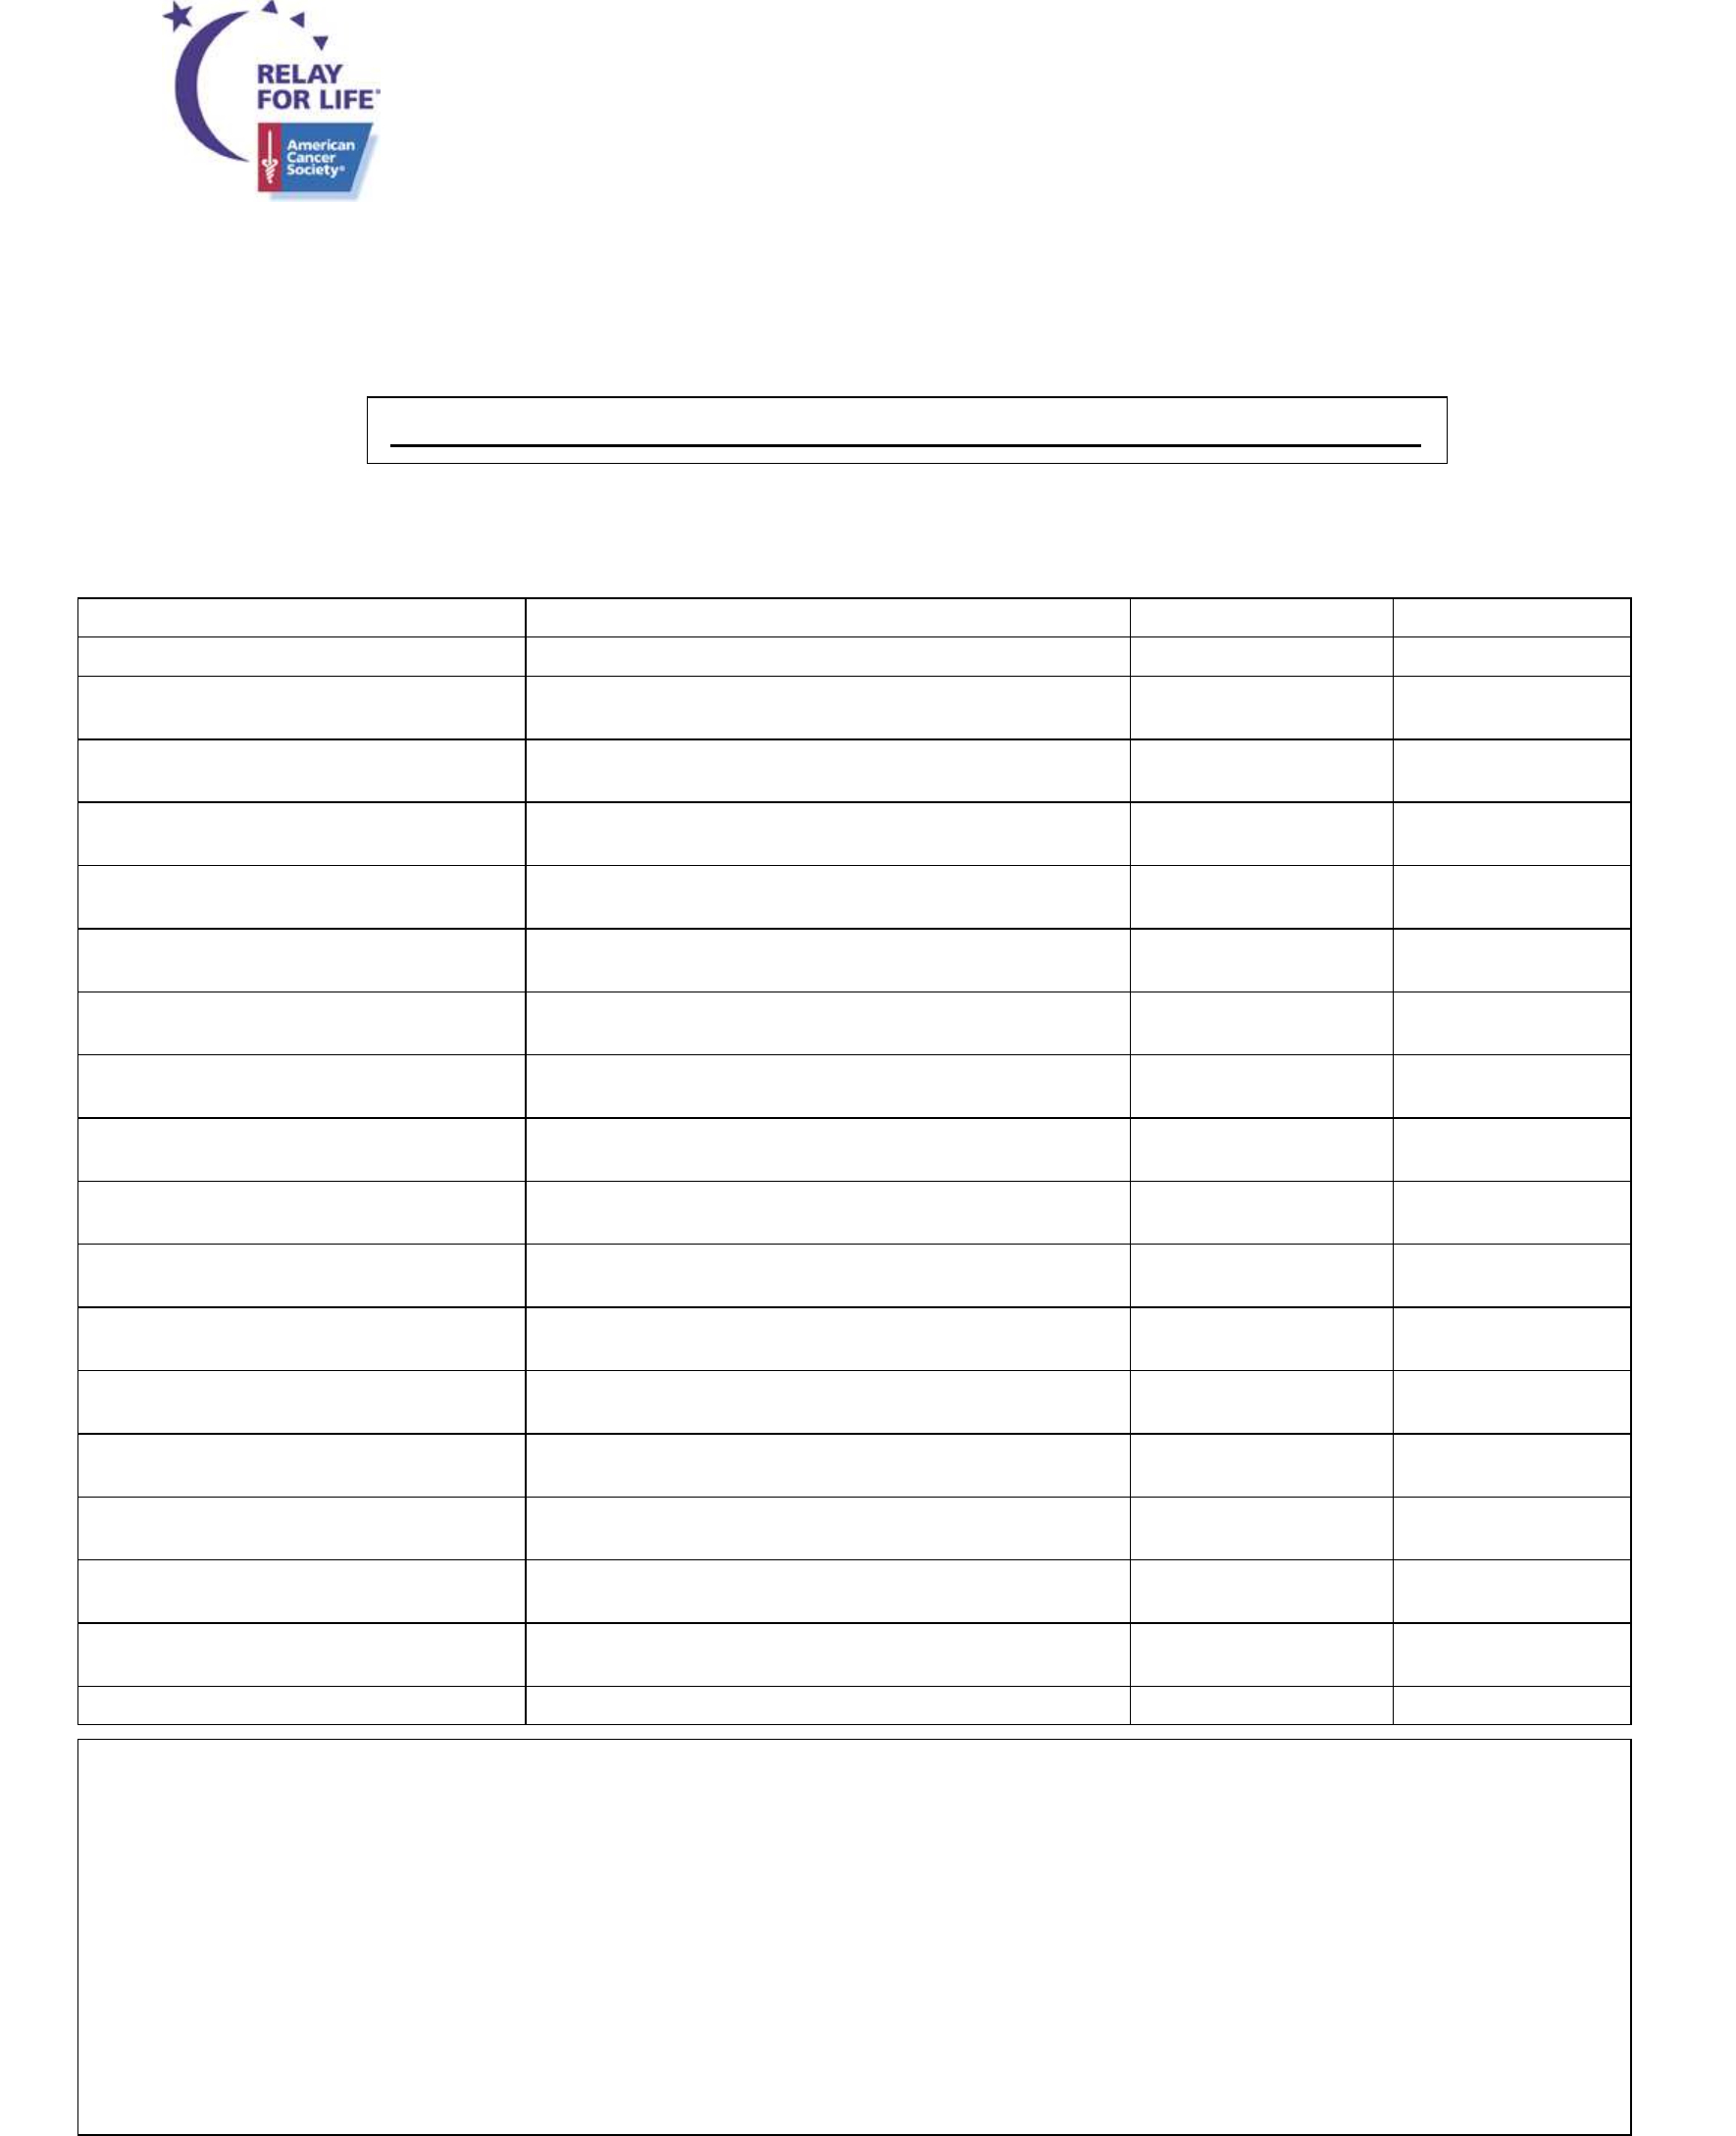 Relay For Life Donation Form – America Free Download Inside Blank Sponsor Form Template Free